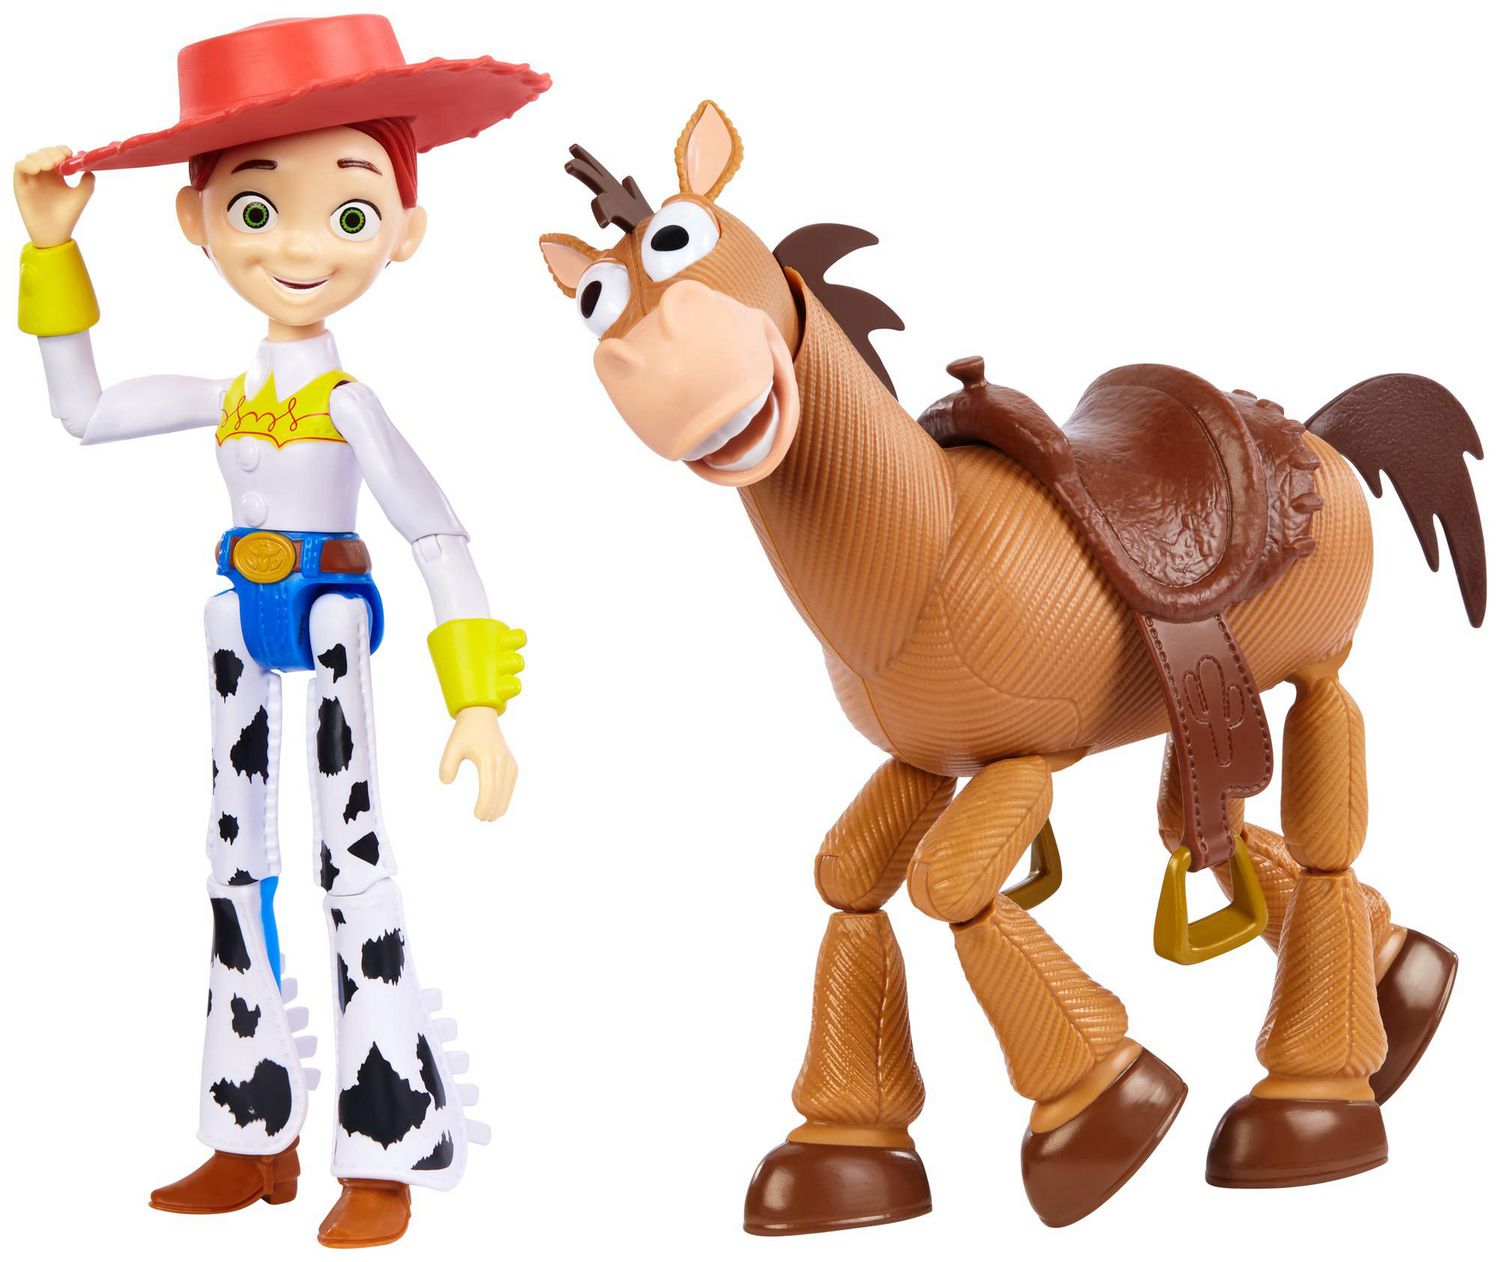 Disney and Pixar Toy Story Jessie and Bullseye 2-Pack Character